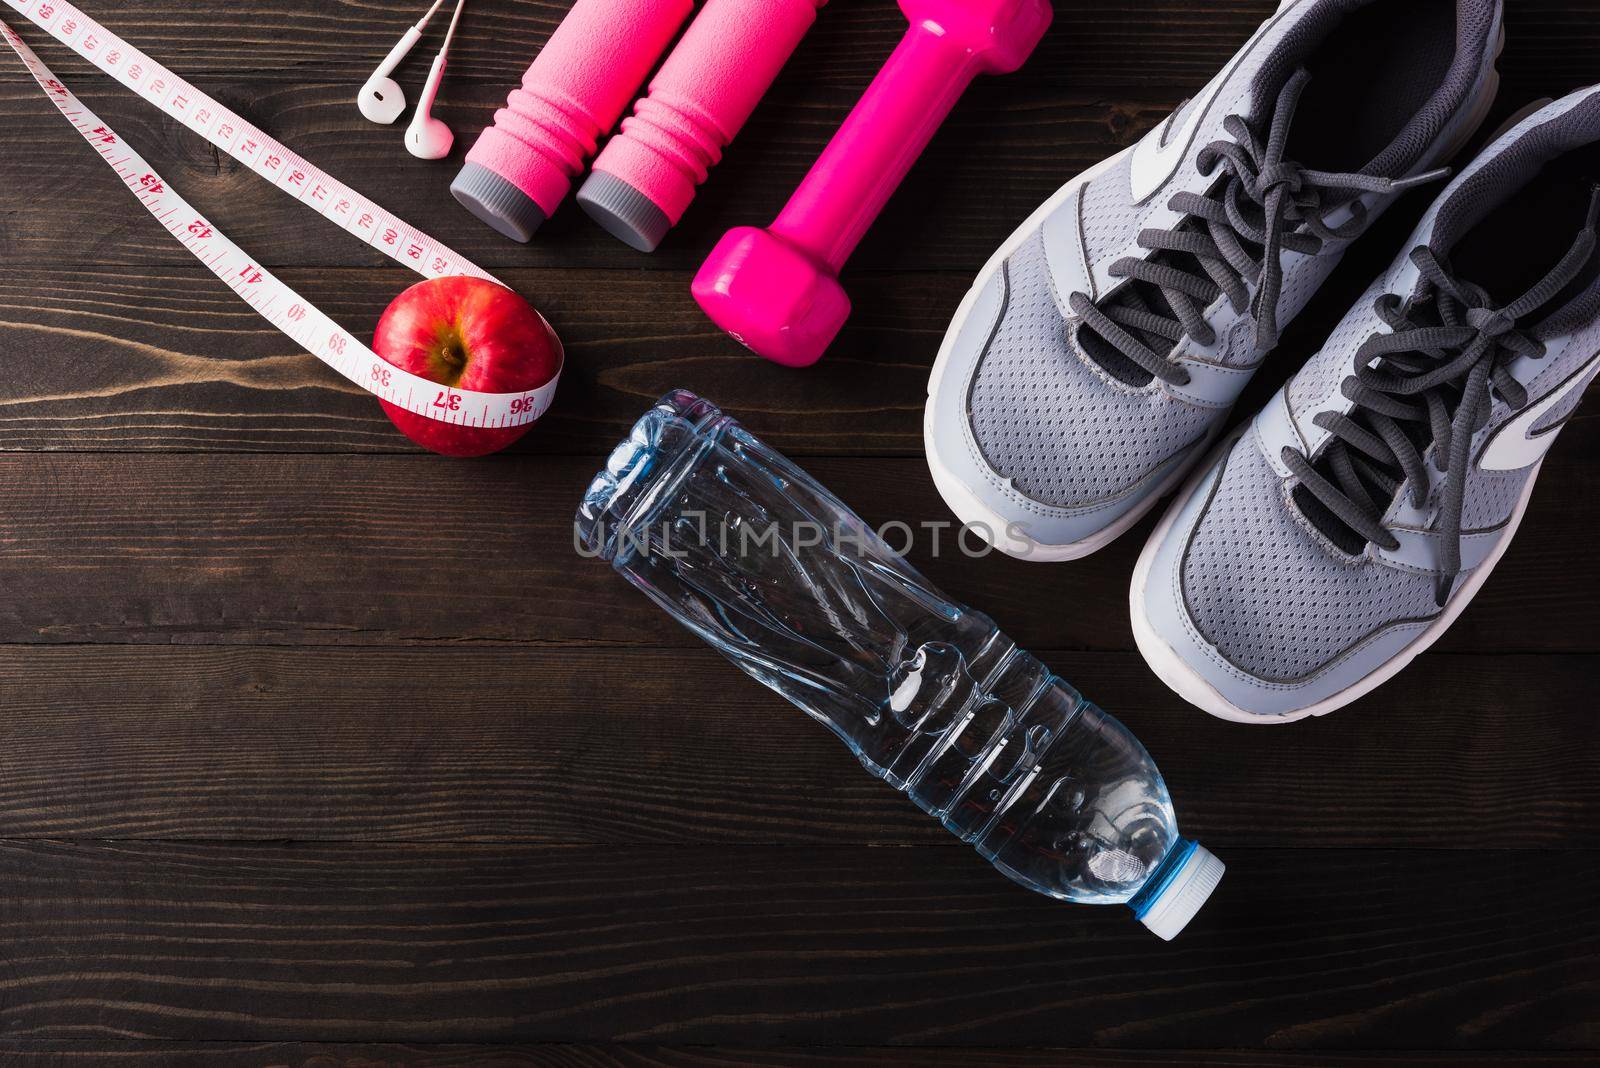 Pair sports shoes, headphones, dumbbell and water bottle on black wood table background, Gray sneakers and accessories equipment in fitness GYM, Healthy workout active lifestyle diet concept